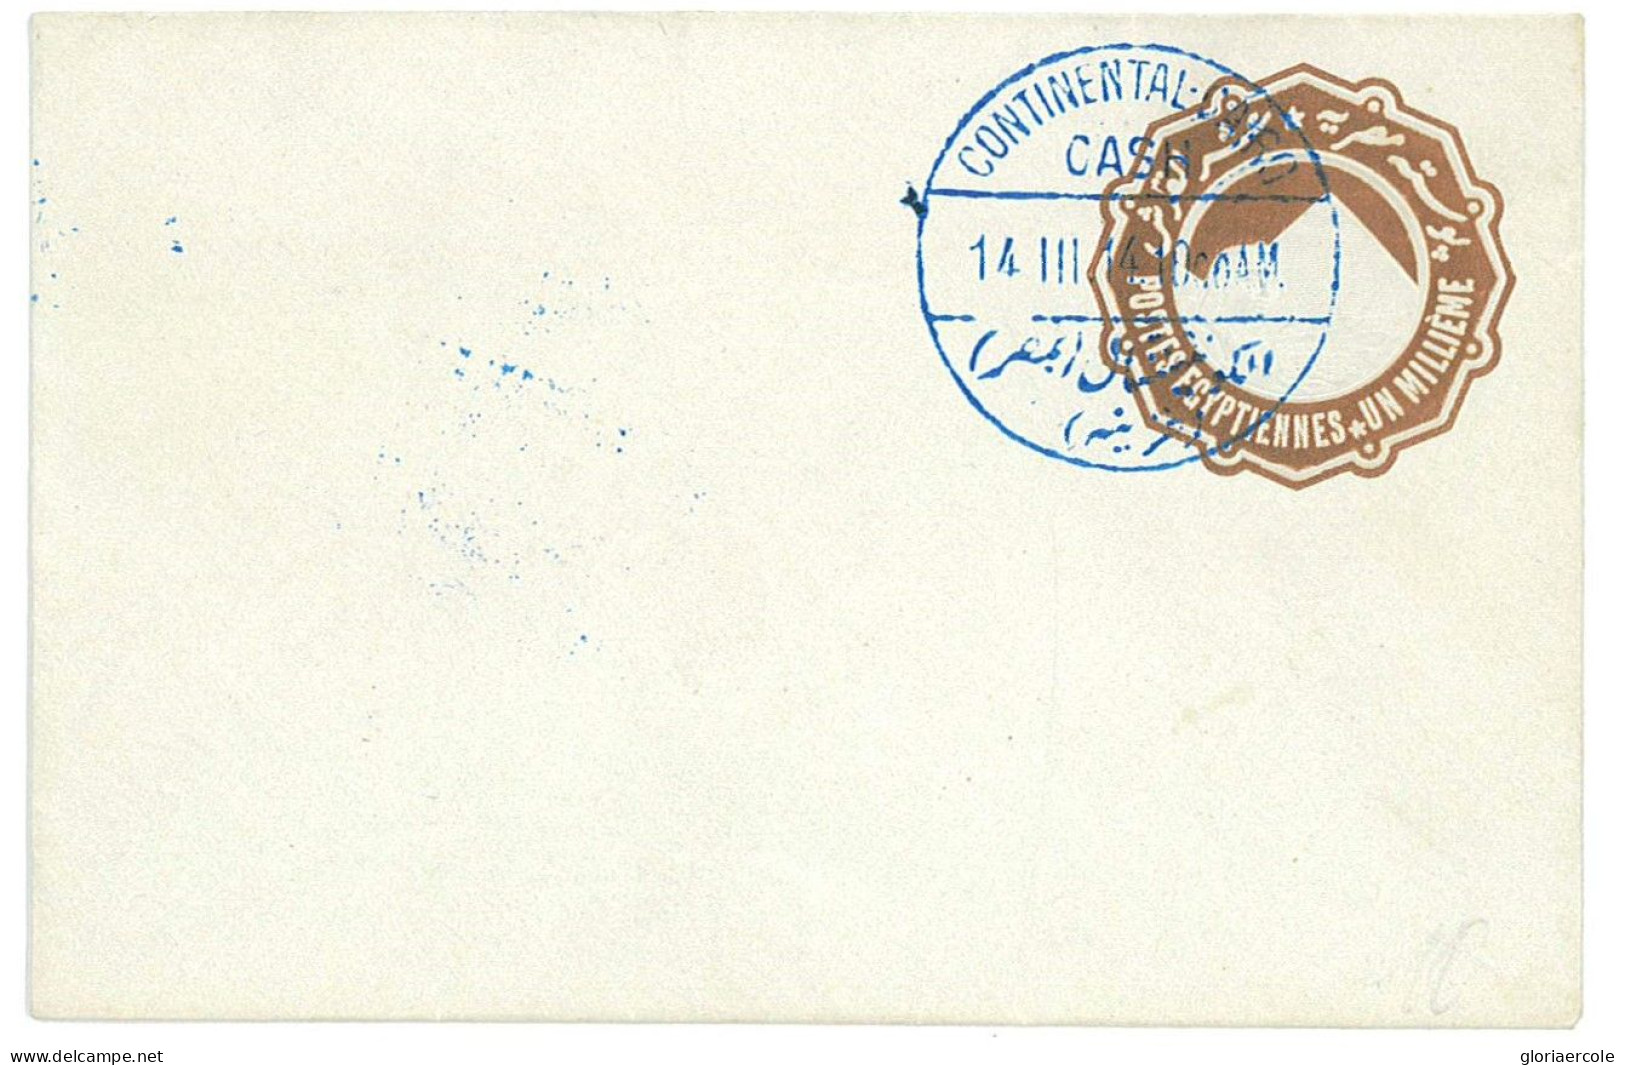 P3028 - EGYPT STATIONERY NILE CAT. SEN NR. 4 CTO IN BLUE, CONTINENTAL HOTEL CASH 1914 - 1866-1914 Khedivate Of Egypt